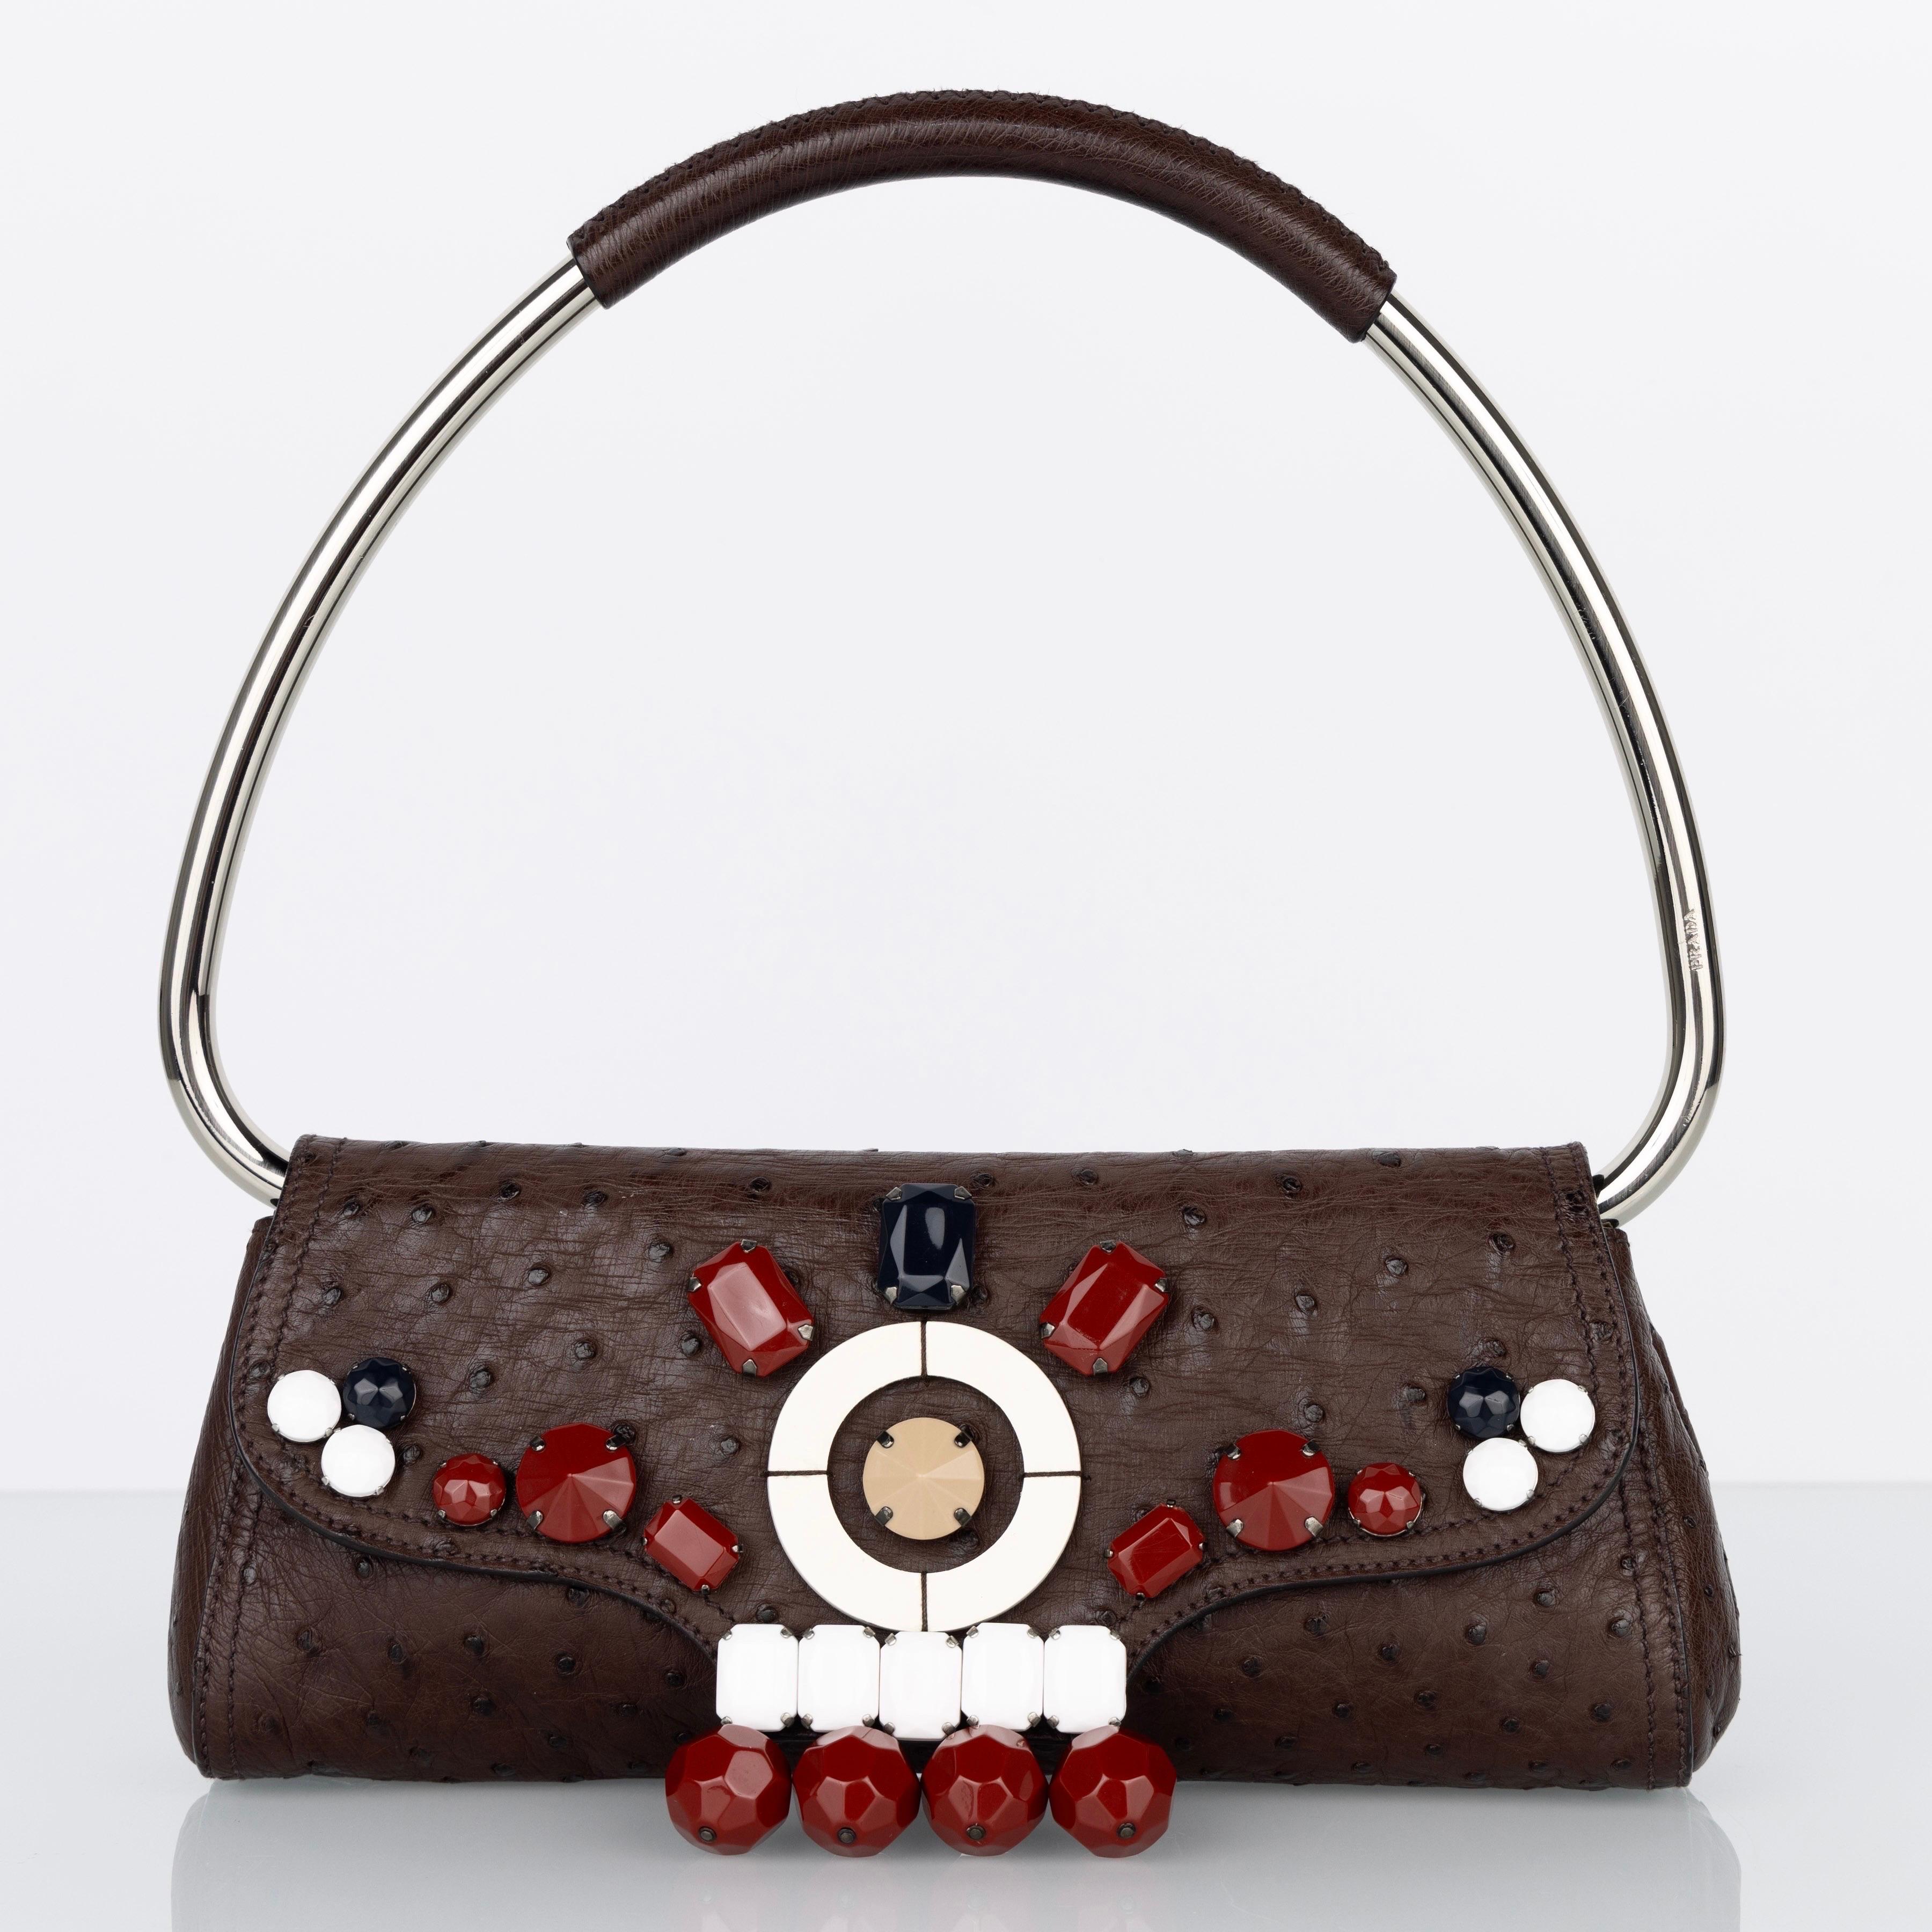 Prada Brown Ostrich Leather Jewel Embellished Swing Bag SS 2003 Archival Piece For Sale 10